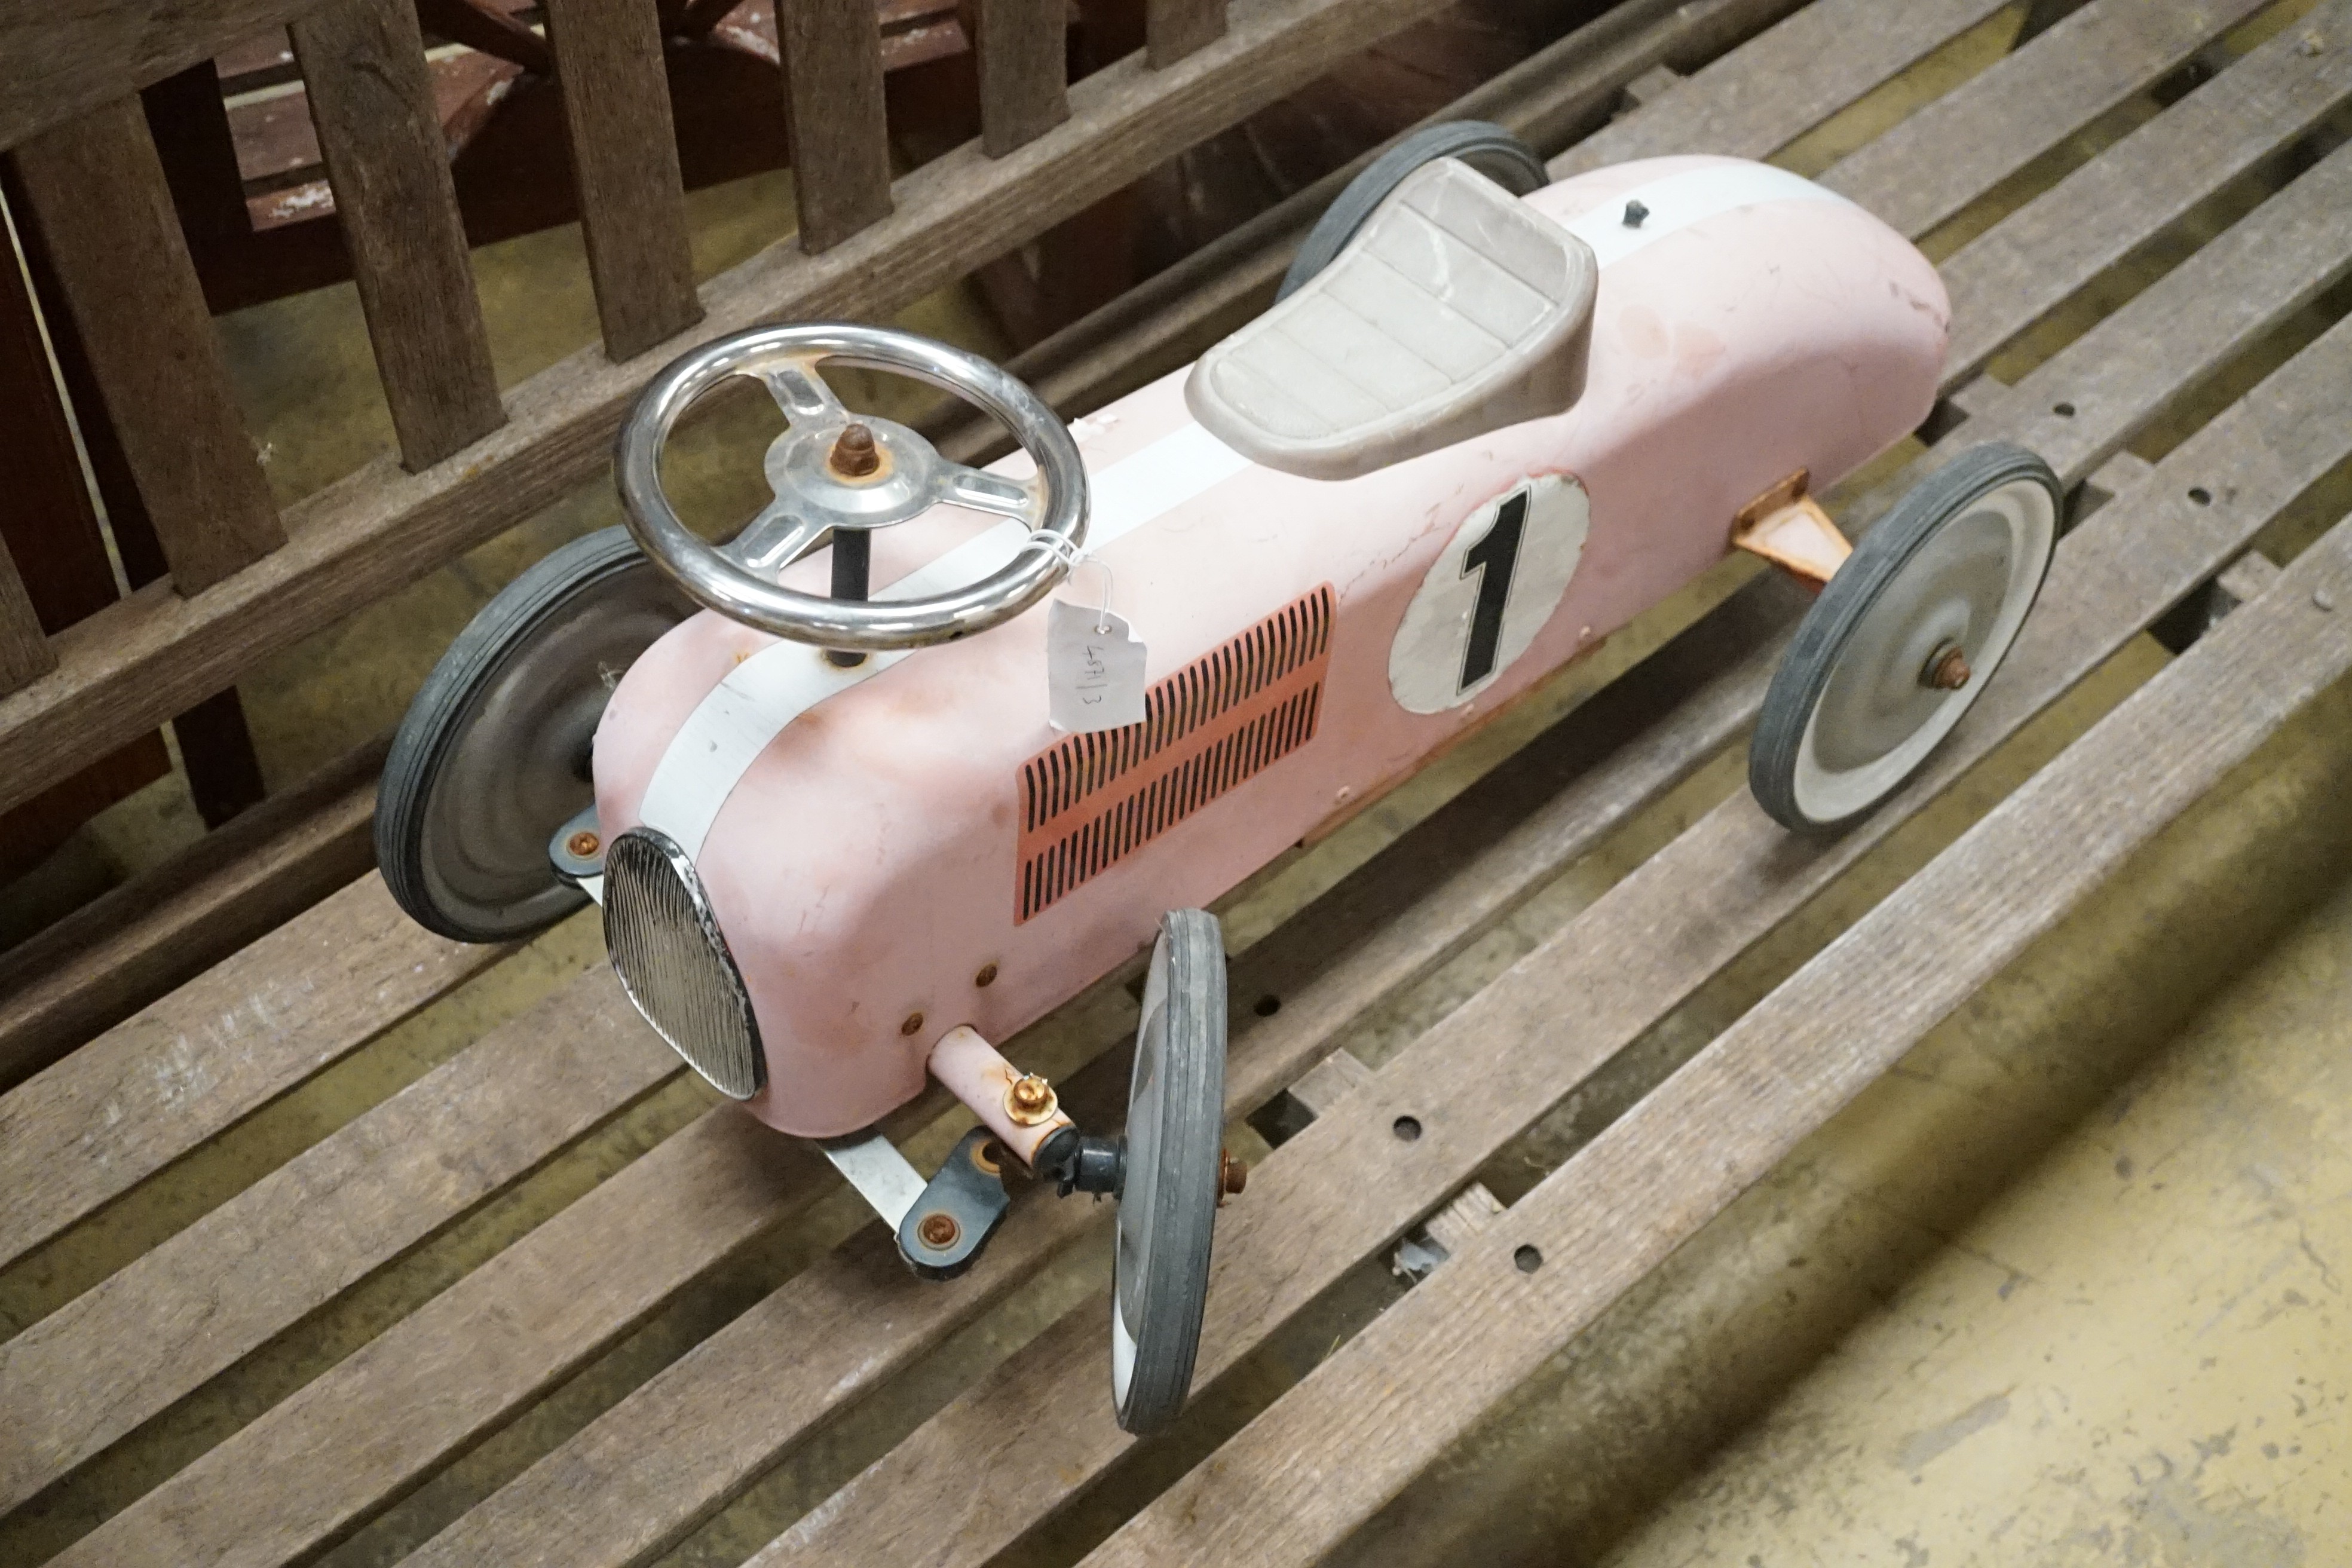 A child's sit-on toy racing car